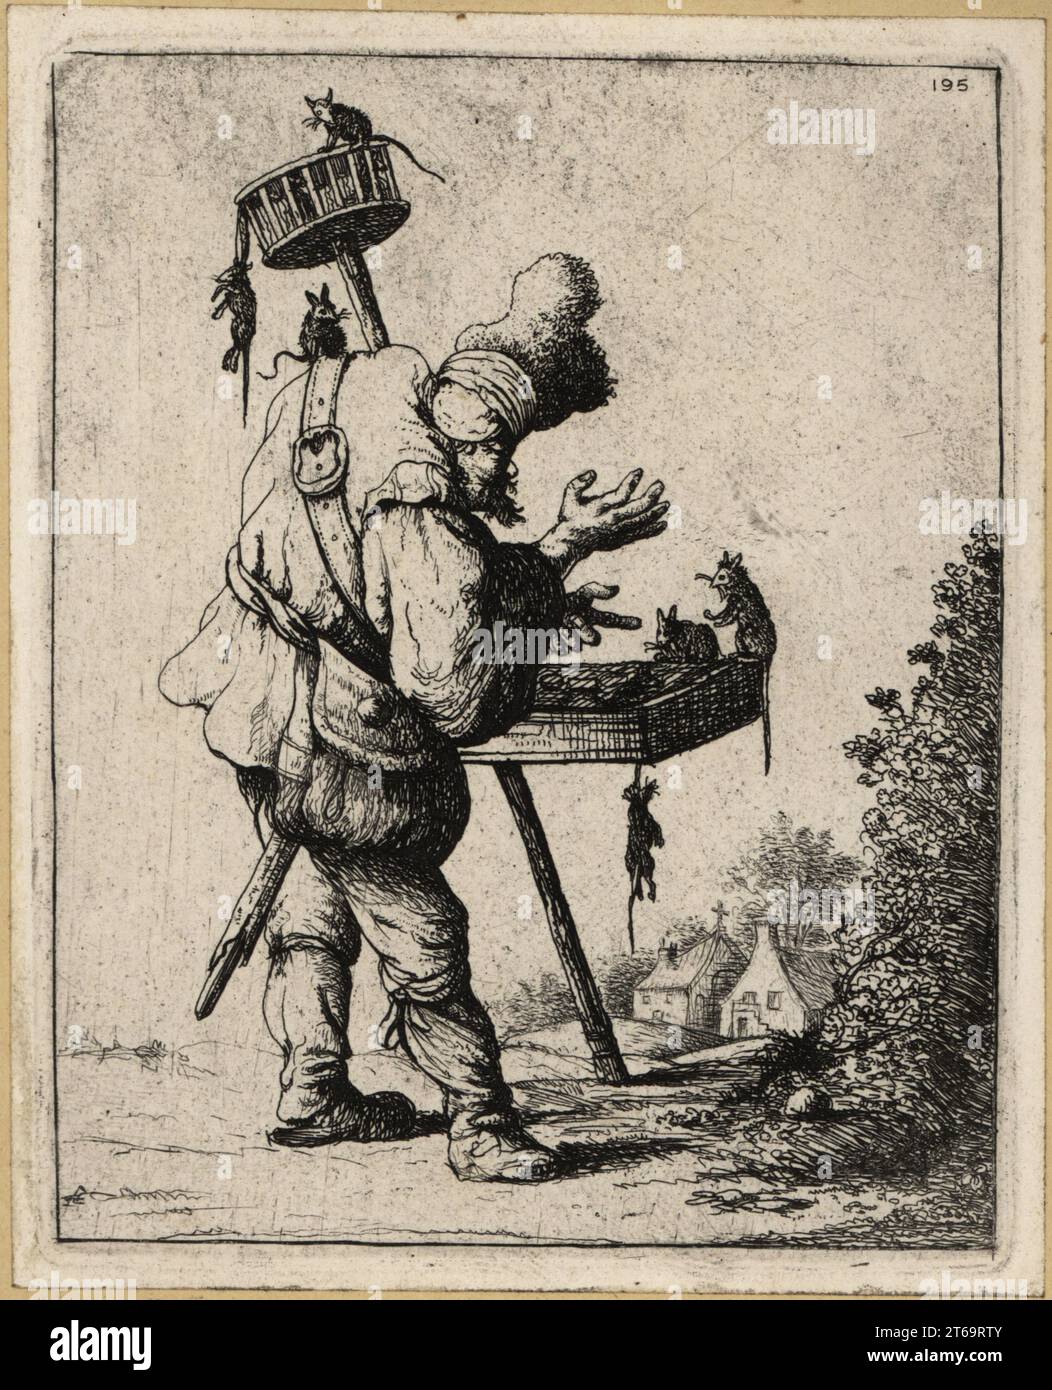 https://c8.alamy.com/comp/2T69RTY/17th-century-dutch-itinerant-rat-catcher-with-tray-of-poison-trap-on-a-long-pole-poison-bag-and-dagger-from-a-series-of-beggars-after-rembrandt-1632-copperplate-engraving-by-david-deuchar-after-an-original-by-jan-van-vliet-from-a-collection-of-etchings-after-the-most-eminent-masters-of-the-dutch-and-flemish-schools-edinburgh-1803-2T69RTY.jpg